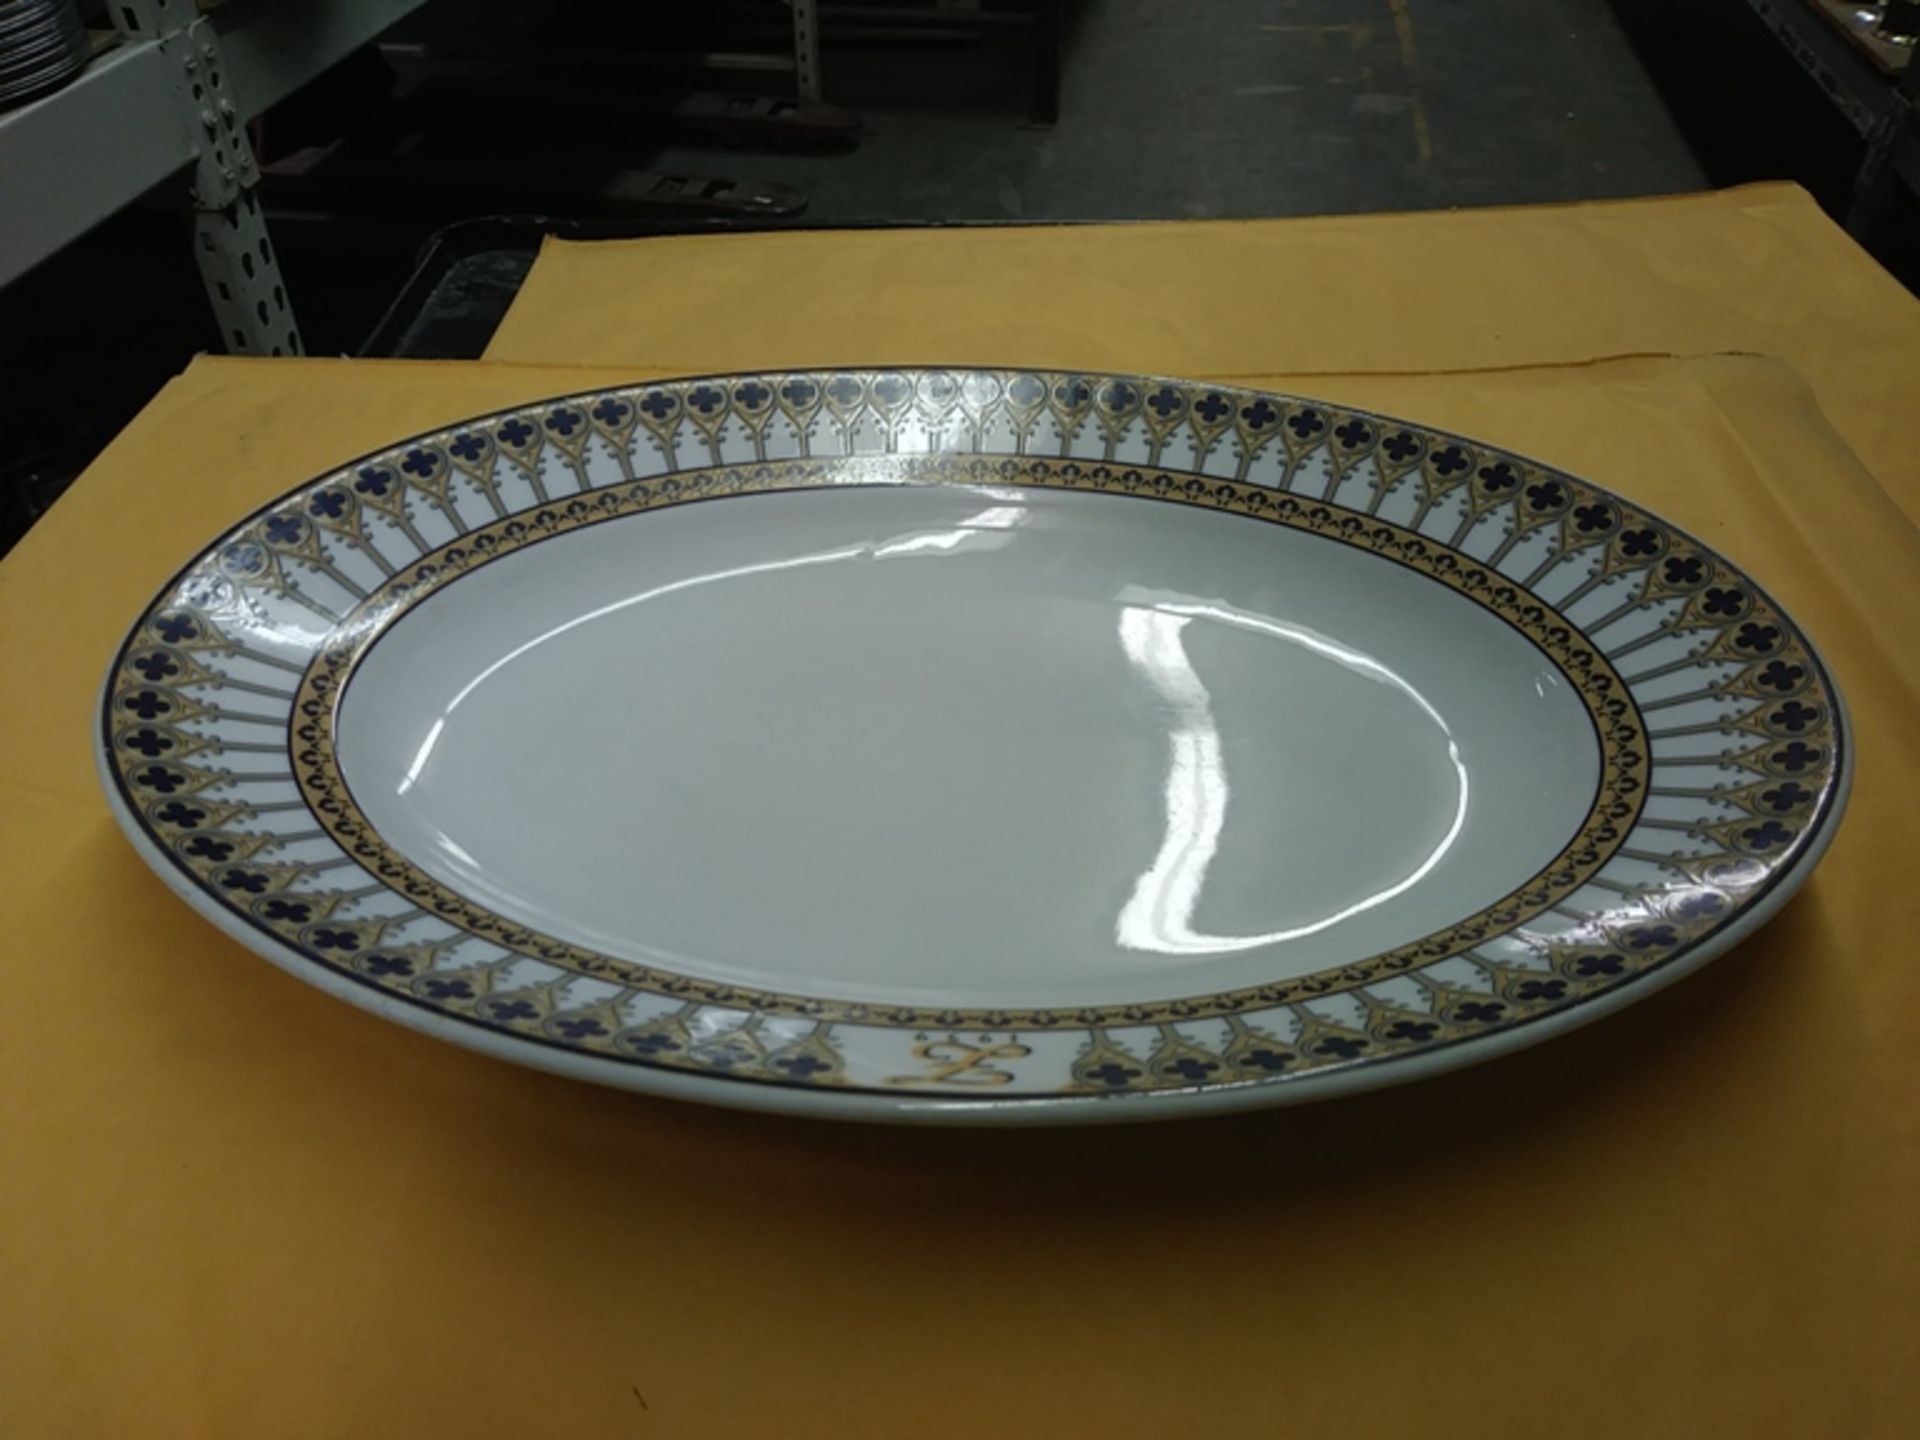 NEW 14" X 9" SCHONWALD OVAL PLATTER (INCLUDES QTY: 7)